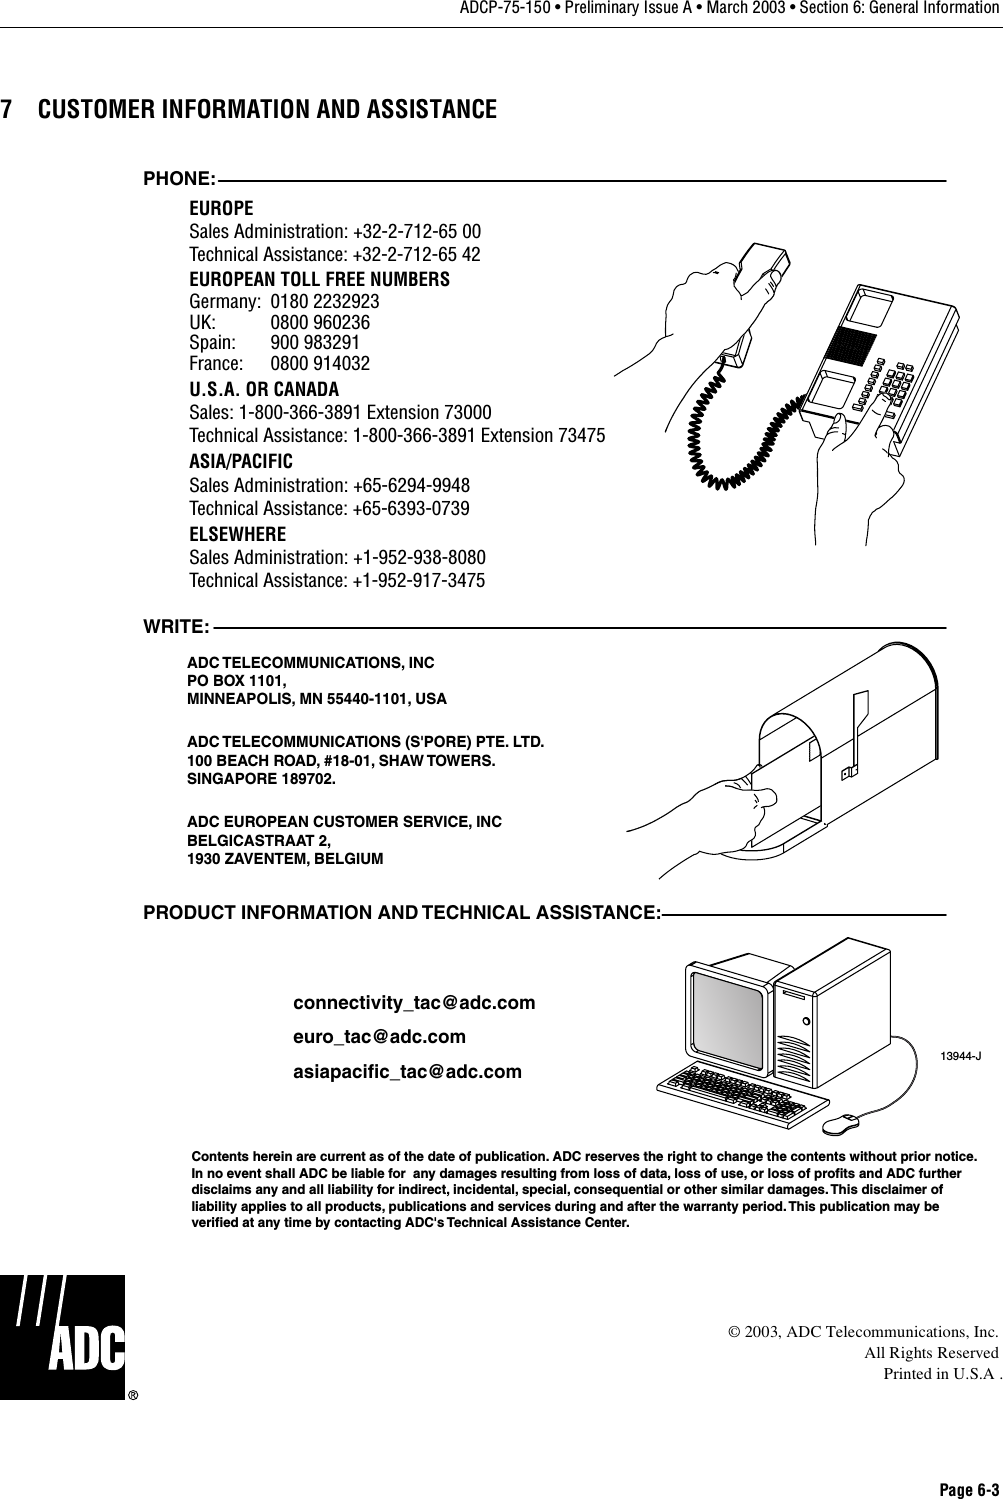 Page 6-3ADCP-75-150 • Preliminary Issue A • March 2003 • Section 6: General Information7 CUSTOMER INFORMATION AND ASSISTANCE©2003, ADC Telecommunications, Inc.All Rights ReservedPrinted in U.S.A .13944-JWRITE:ADC TELECOMMUNICATIONS,  INCPO BOX 1101,MINNEAPOLIS, MN 55440-1101, USAADC TELECOMMUNICATIONS (S&apos;PORE) PTE. LTD.100 BEACH ROAD, #18-01, SHAW TOWERS.SINGAPORE 189702.ADC EUROPEAN CUSTOMER SERVICE, INCBELGICASTRAAT 2,1930 ZAVENTEM, BELGIUMPHONE:EUROPESales Administration: +32-2-712-65 00Technical Assistance: +32-2-712-65 42EUROPEAN TOLL FREE NUMBERSUK: 0800 960236Spain: 900 983291France: 0800 914032Germany: 0180 2232923U.S.A. OR CANADASales: 1-800-366-3891 Extension 73000Technical Assistance: 1-800-366-3891 Extension 73475ASIA/PACIFICSales Administration: +65-6294-9948Technical Assistance: +65-6393-0739ELSEWHERESales Administration: +1-952-938-8080Technical Assistance: +1-952-917-3475PRODUCT INFORMATION AND TECHNICAL ASSISTANCE:Contents herein are current as of the date of publication. ADC reserves the right to change the contents without prior notice.In no event shall ADC be liable for  any damages resulting from loss of data, loss of use, or loss of profits and ADC furtherdisclaims any and all liability for indirect, incidental, special, consequential or other similar damages. This disclaimer ofliability applies to all products, publications and services during and after the warranty period. This publication may beverified at any time by contacting ADC&apos;s Technical Assistance Center. euro_tac@adc.comasiapacific_tac@adc.comconnectivity_tac@adc.com